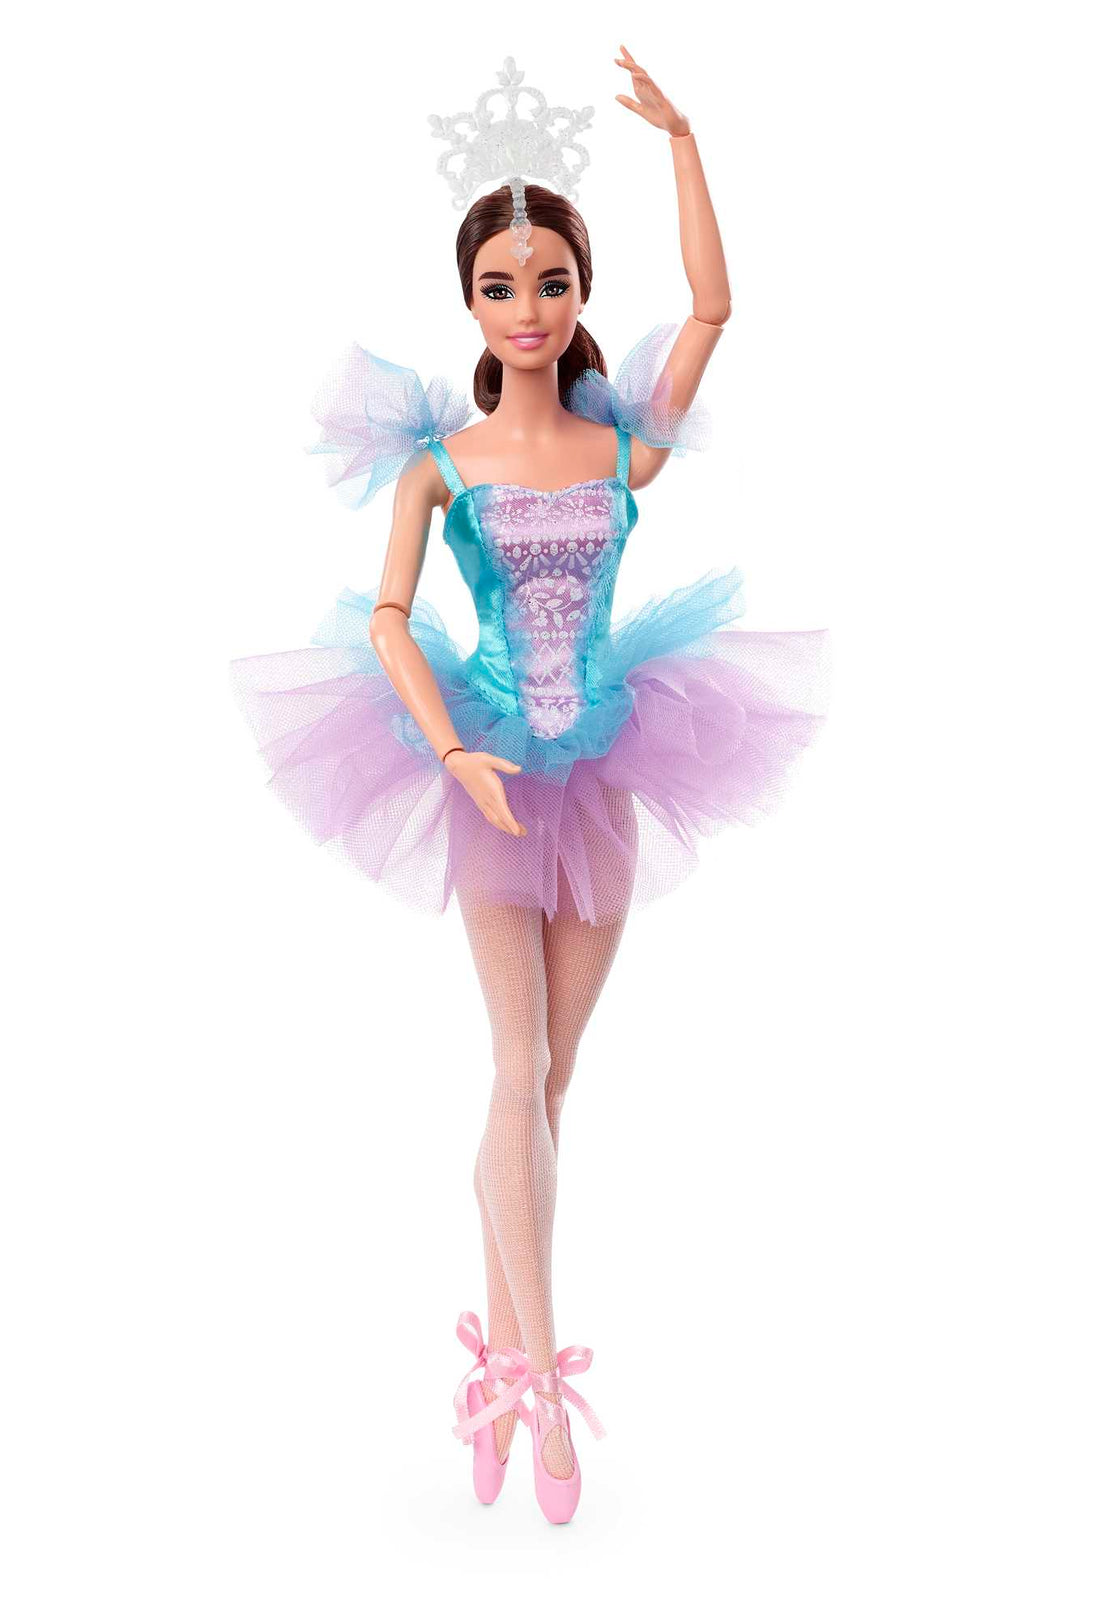 Barbie Signature Ballet Wishes Doll - Dolls and Accessories